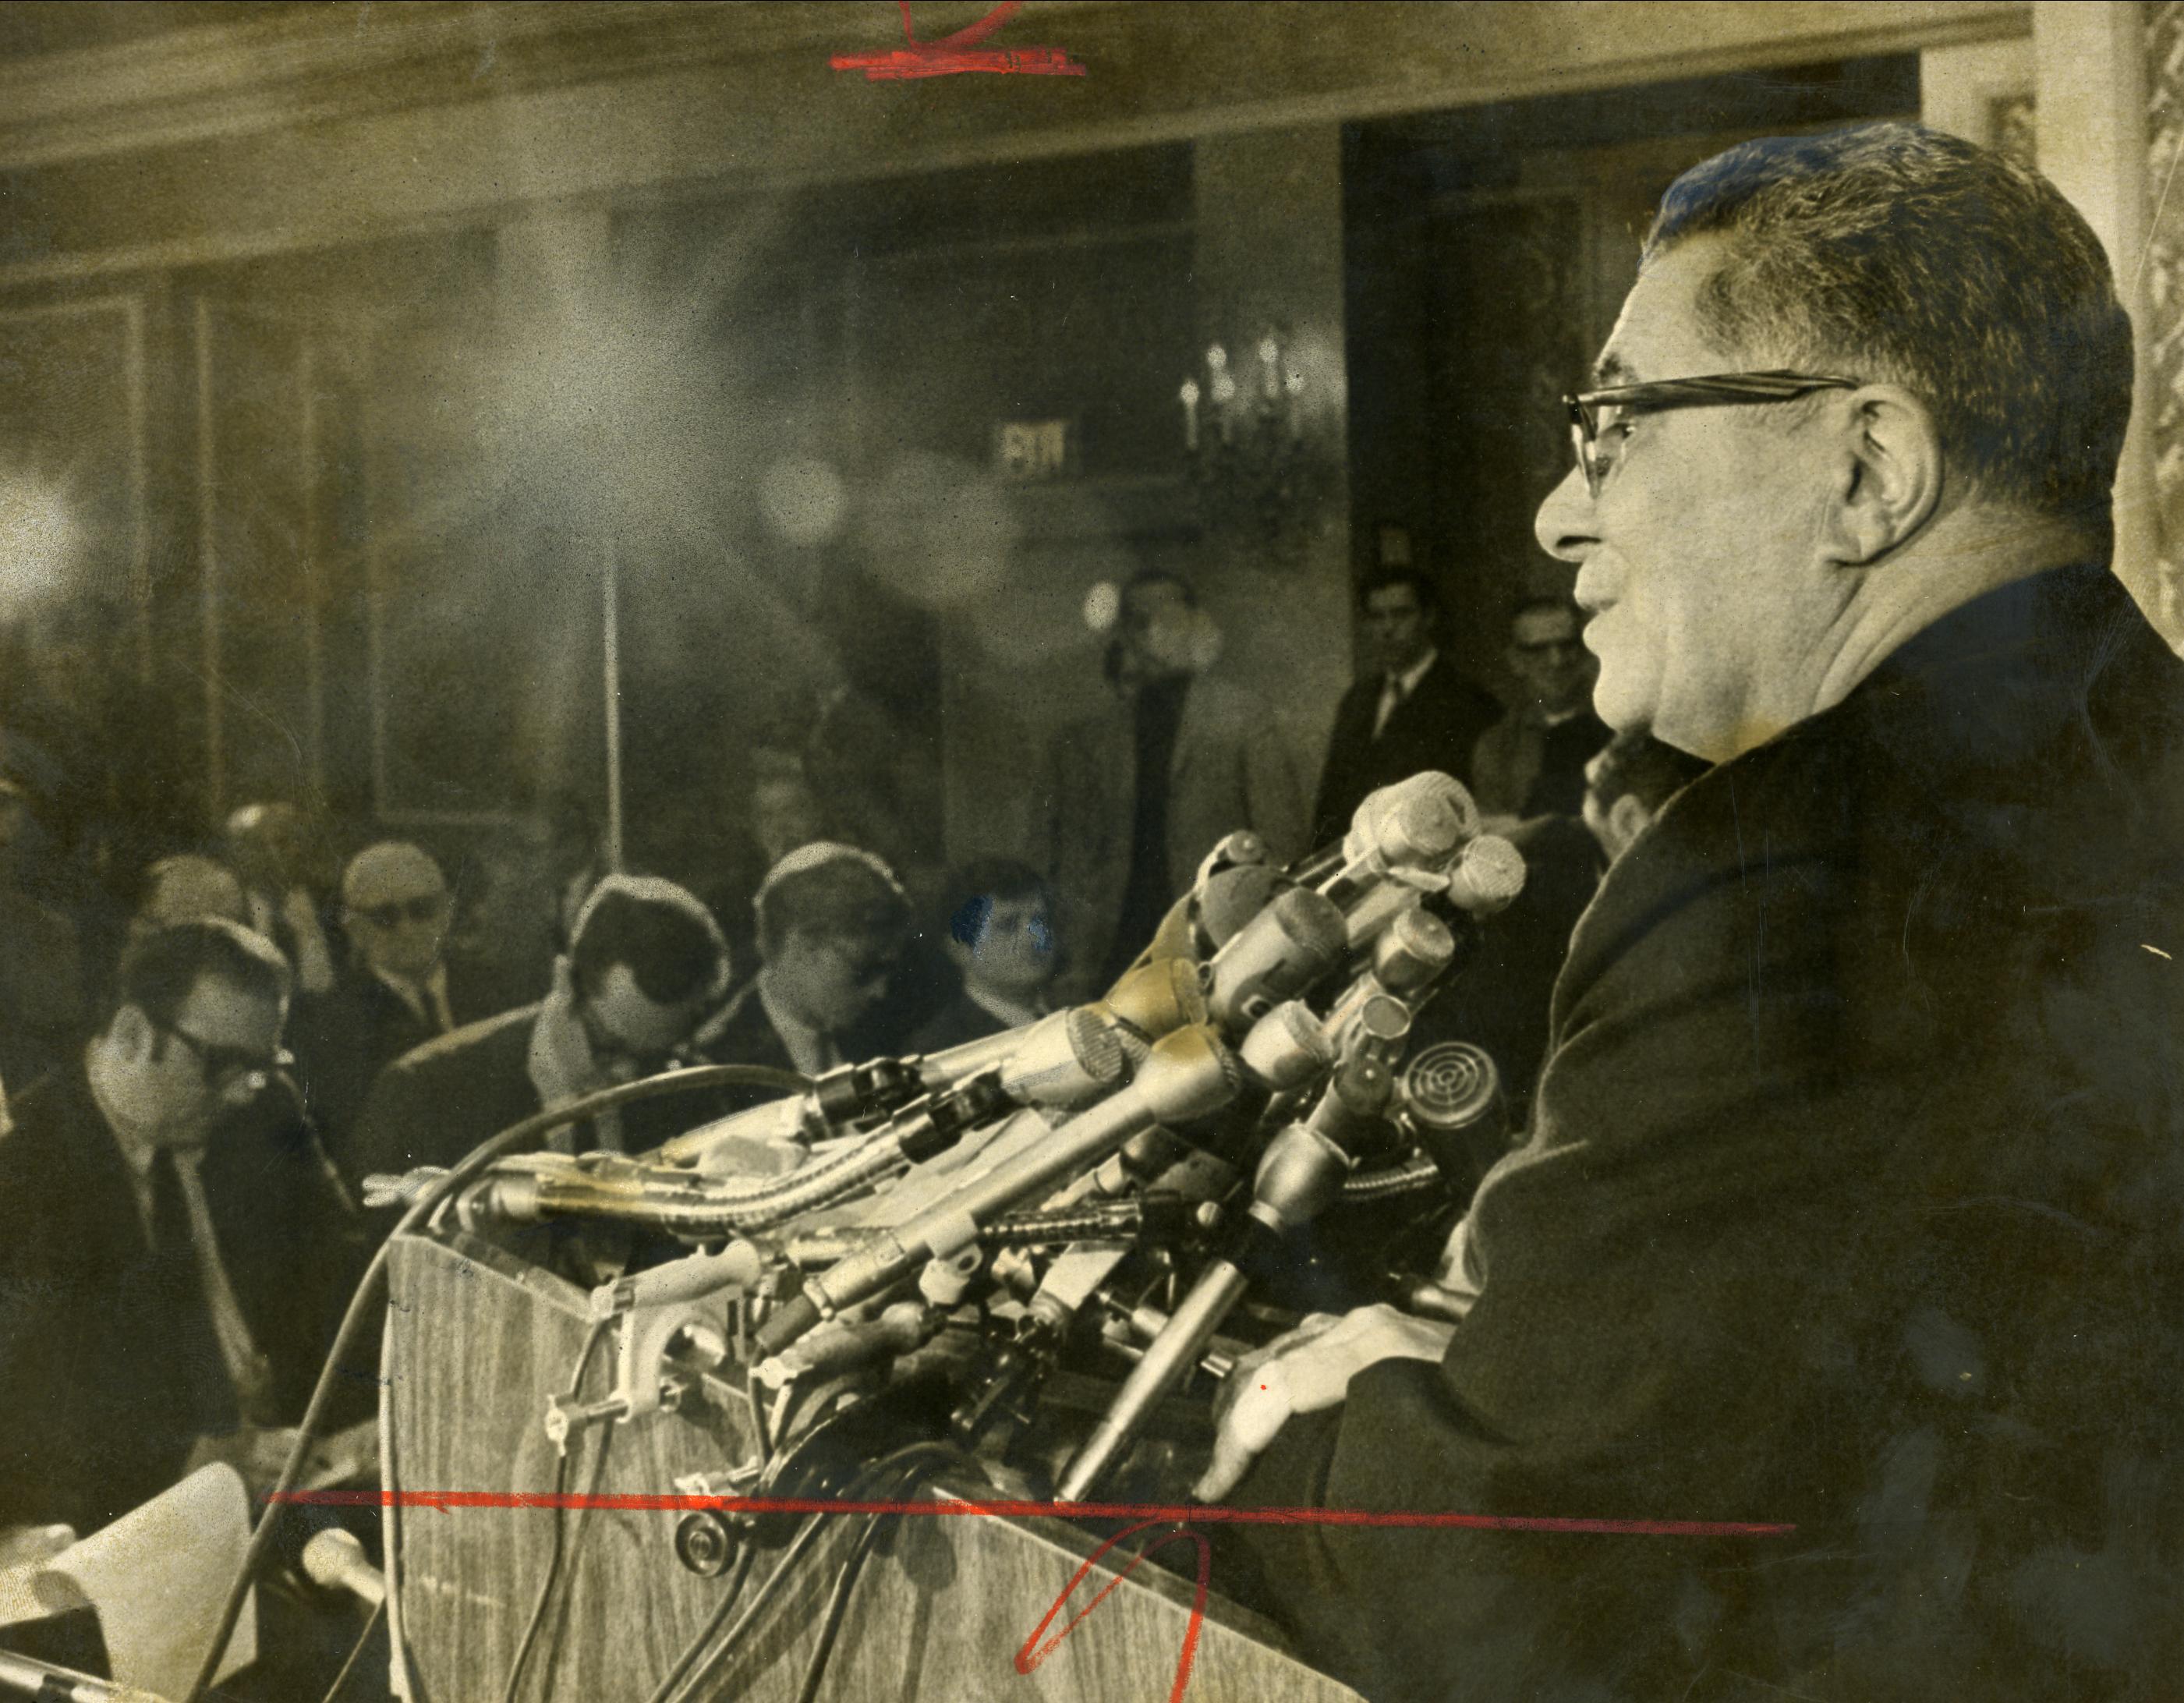 Vince Lombardi talks to reporters at his introductory news conference, February 6, 1969. (Reprinted with permission of the DC Public Library, Star Collection, © Washington Post.)